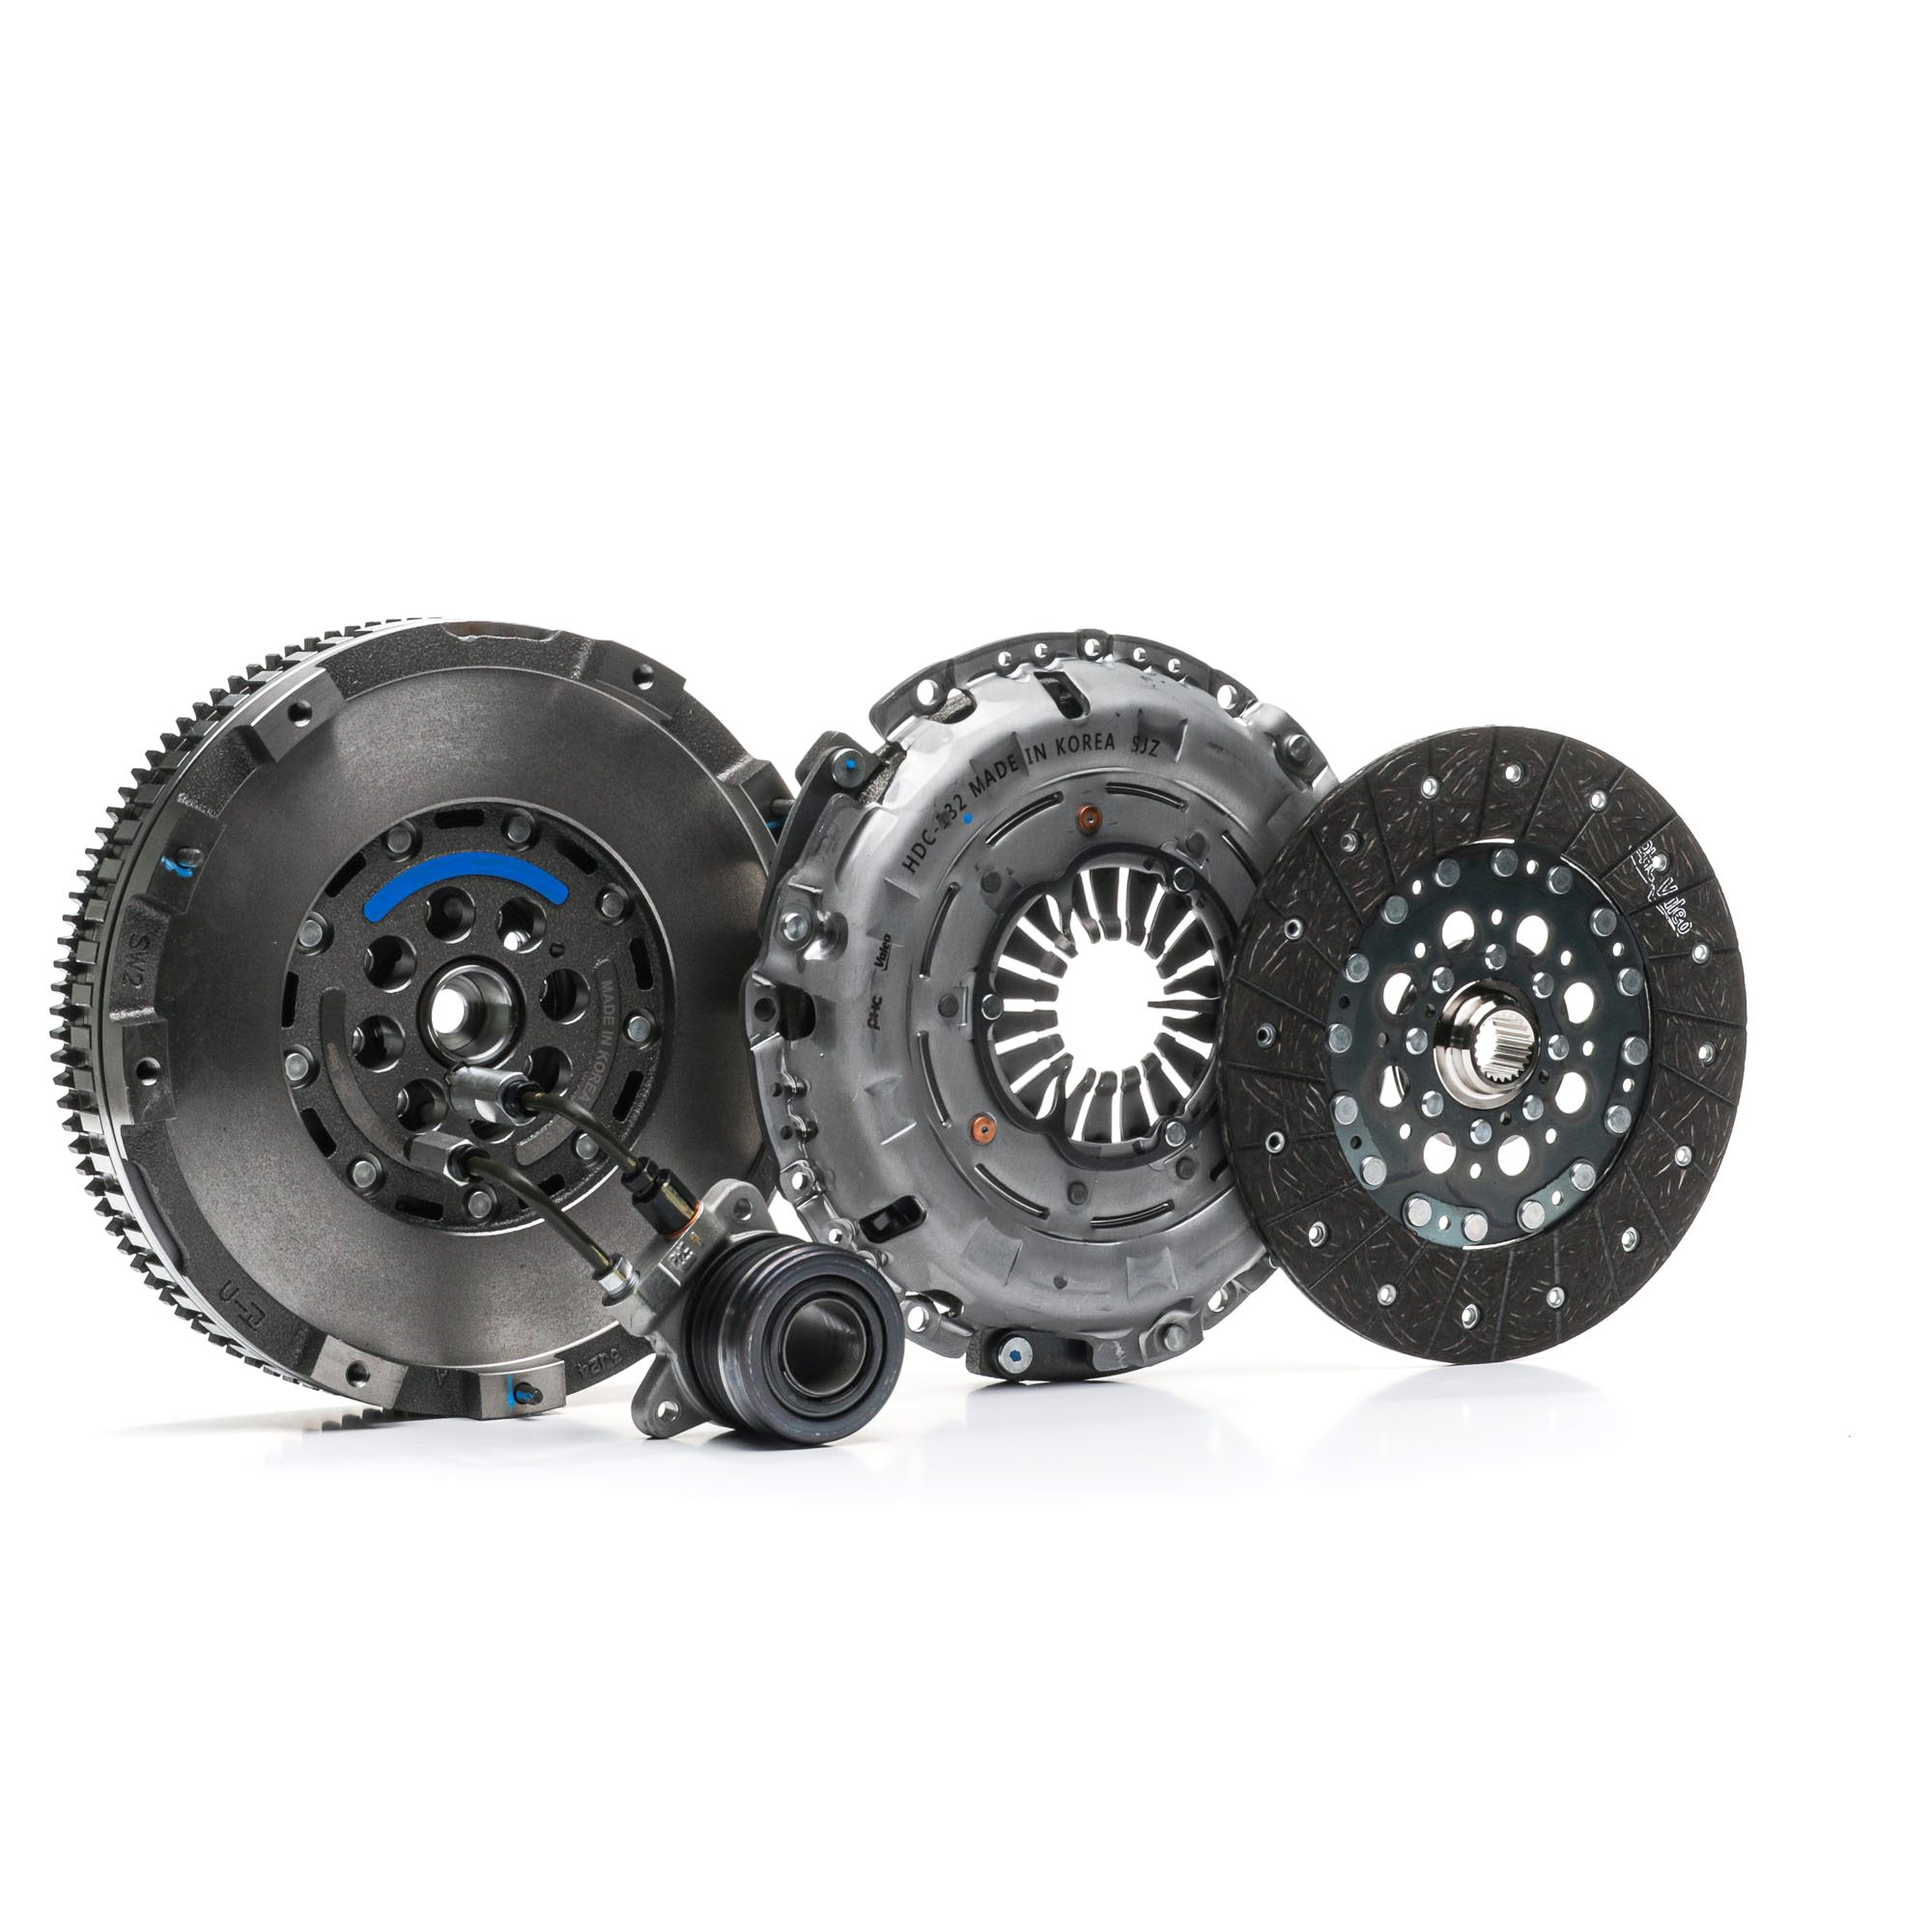 VALEO KIT4P - CONVERSION KIT (CSC) 845050 Clutch kit with single-mass flywheel, with central slave cylinder, 240mm